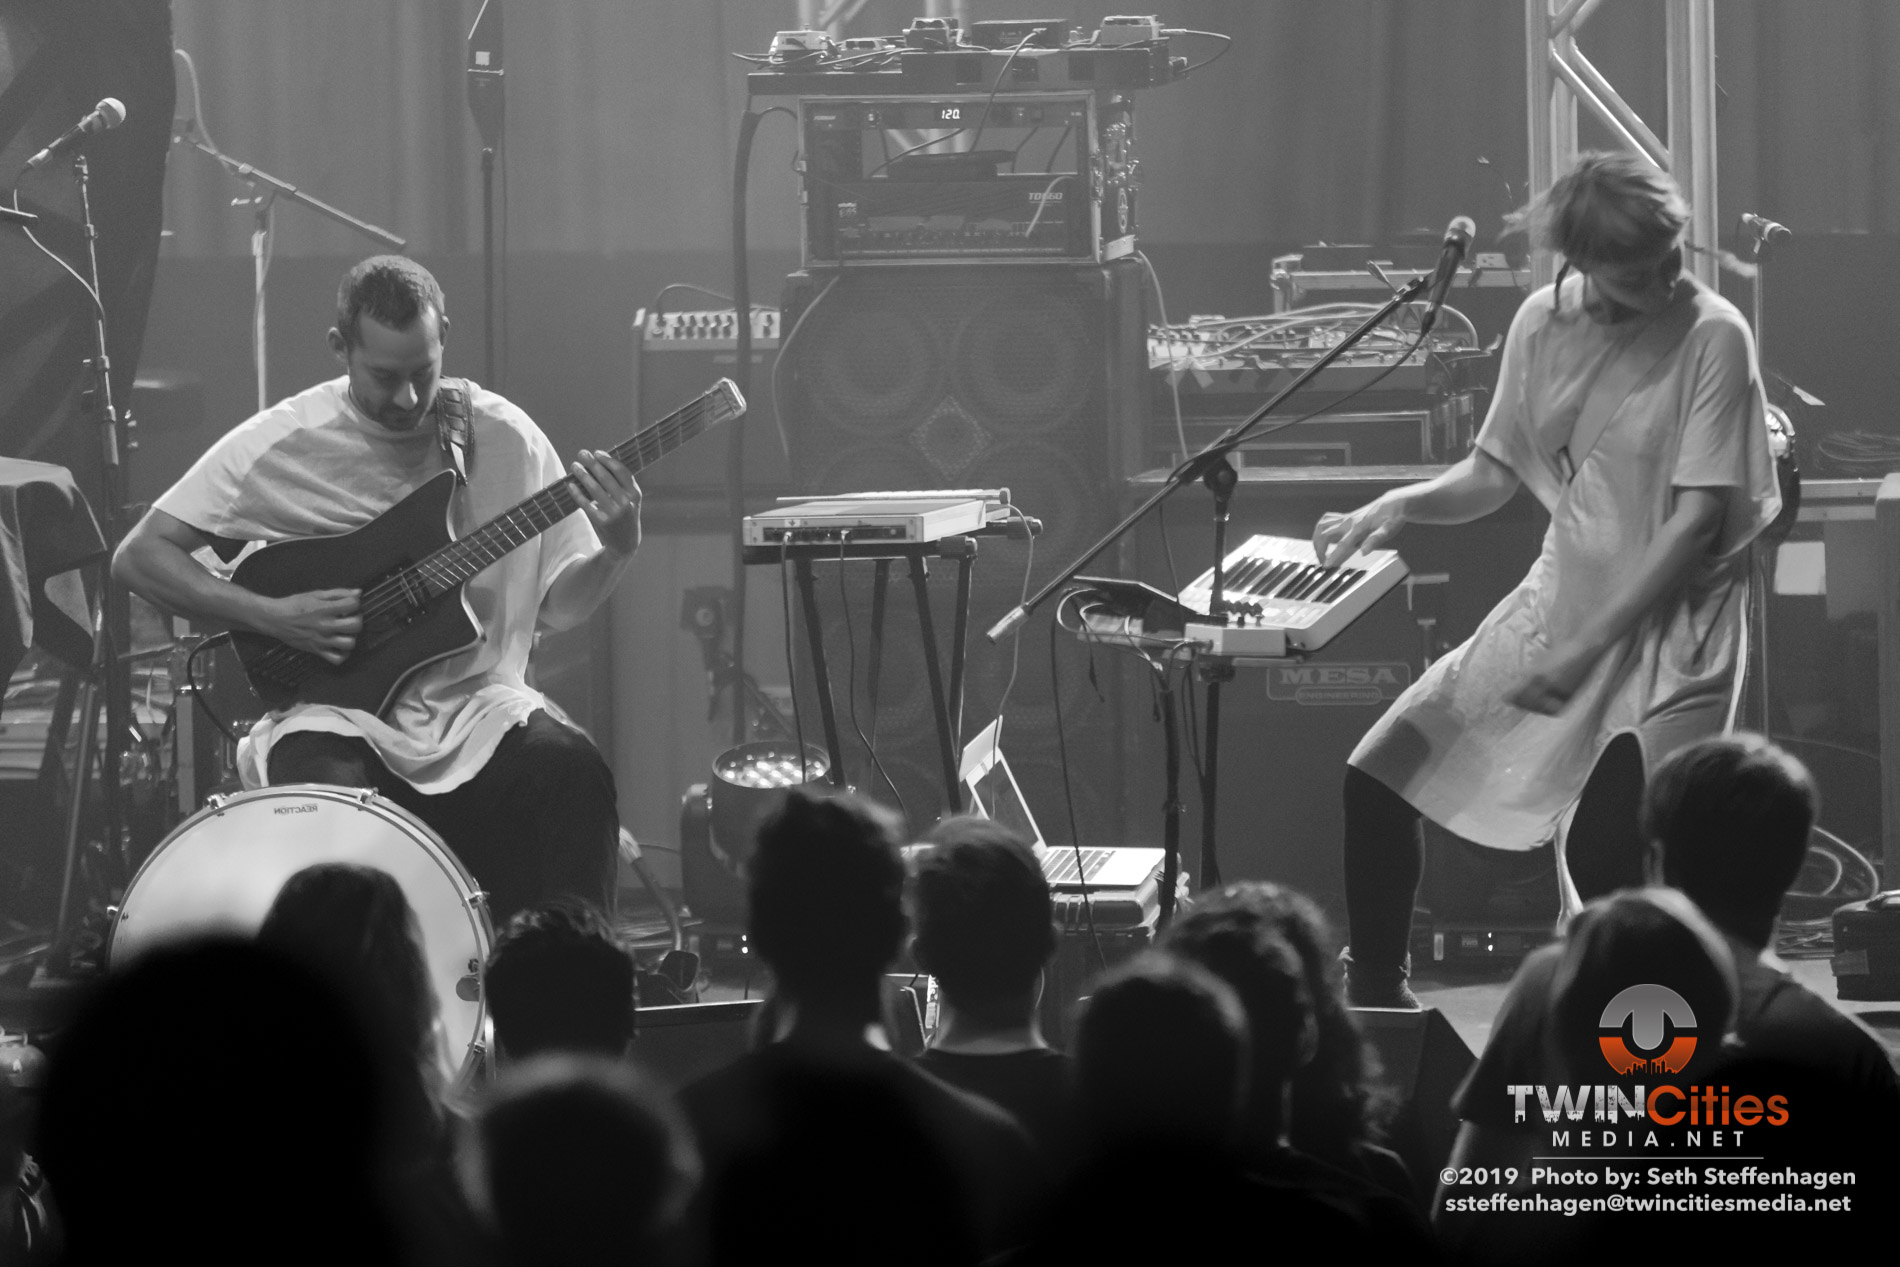 May 15, 2019 - Minneapolis, Minnesota, United States - Buke And Gase live in concert at the Skyway Theatre opening for Animals As Leaders.

(Photo by Seth Steffenhagen/Steffenhagen Photography)